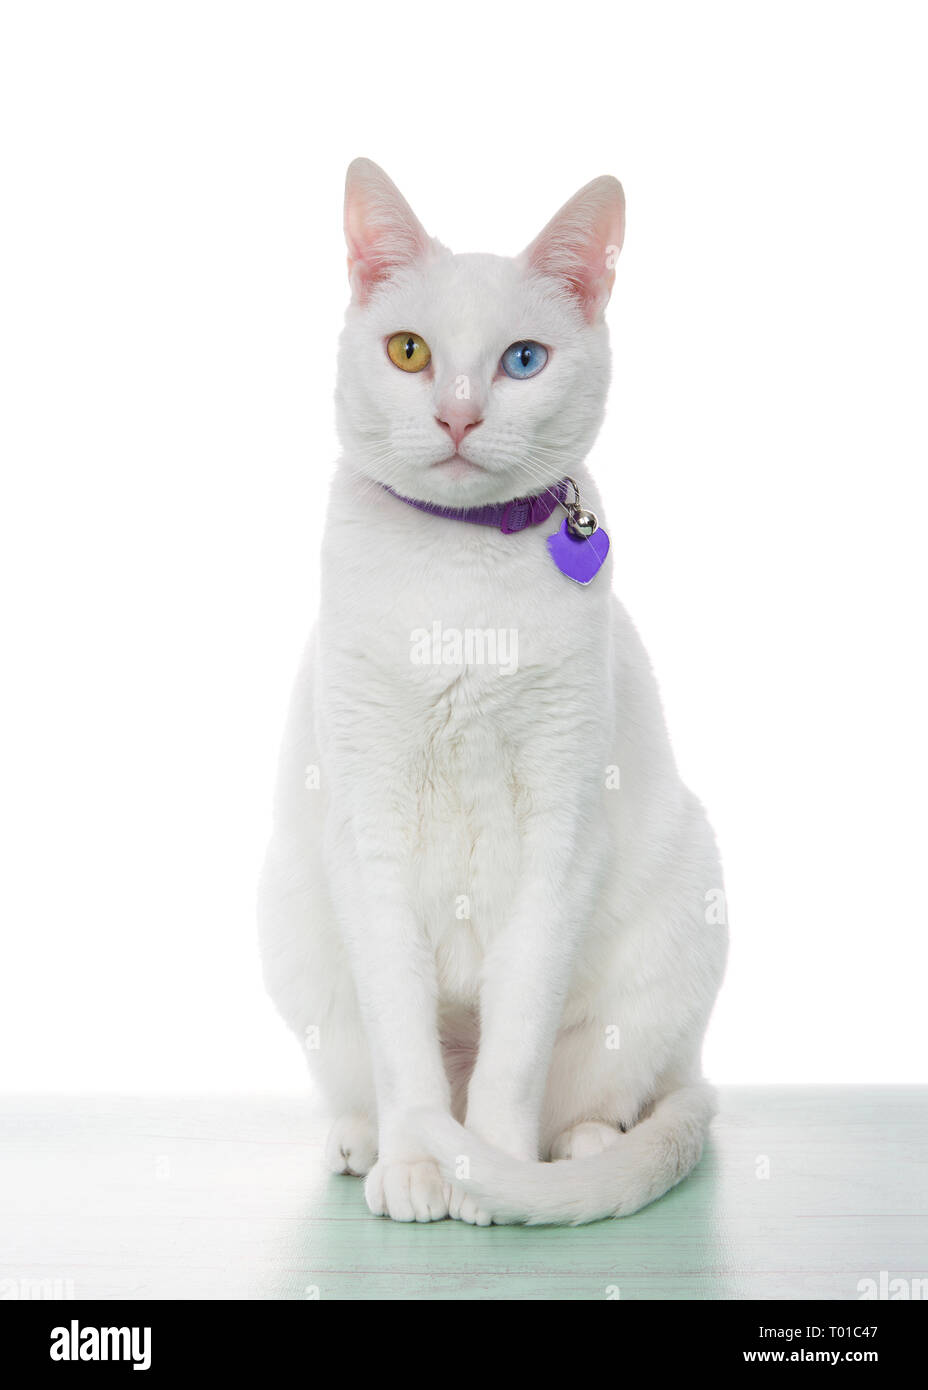 Portrait of a white cat with heterochromia, odd eyes, sitting on a light green surface looking directly at viewer, isolated on white. Wearing ID colla Stock Photo